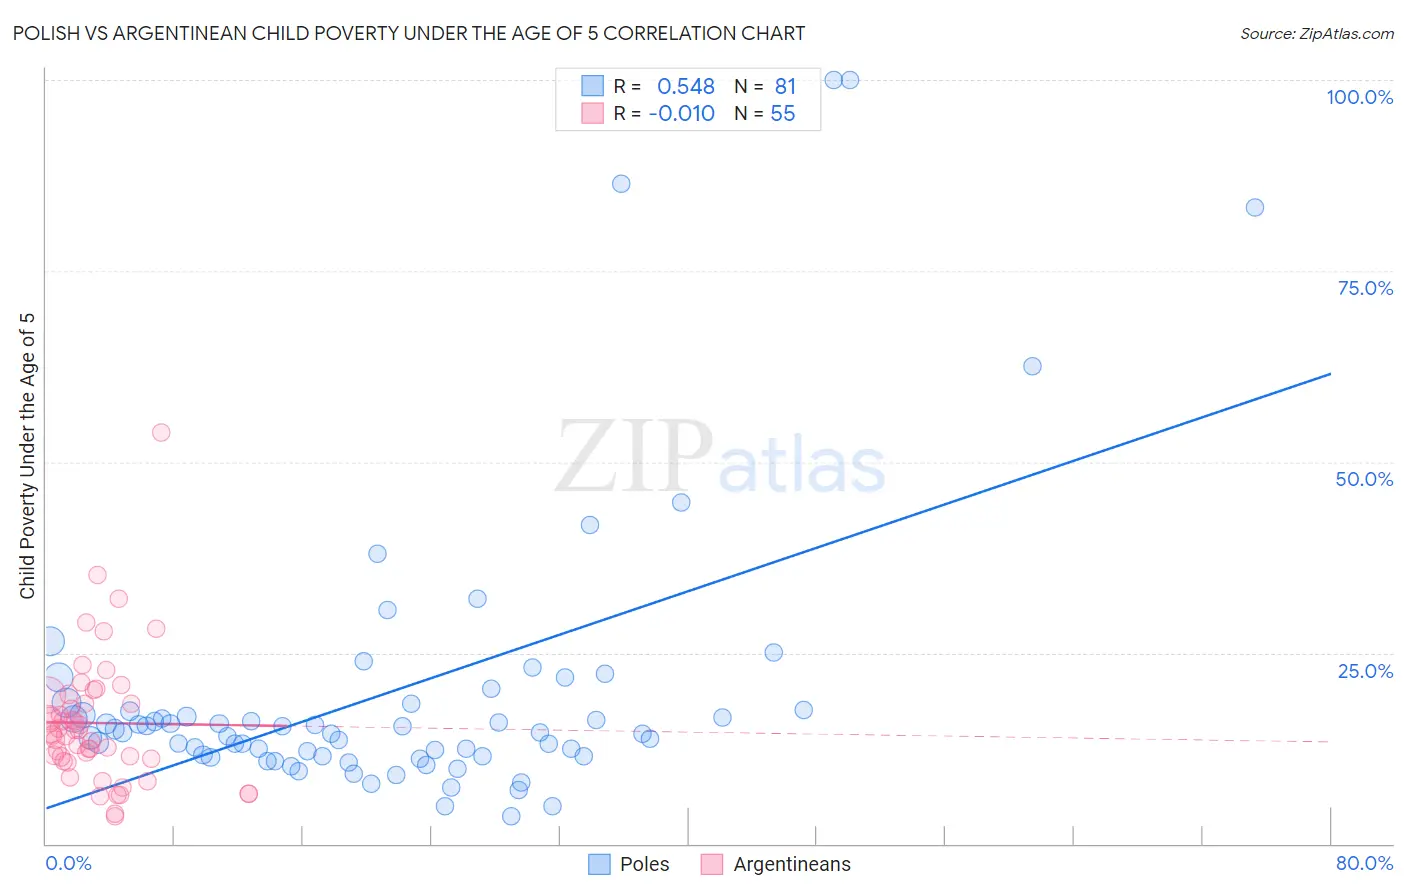 Polish vs Argentinean Child Poverty Under the Age of 5